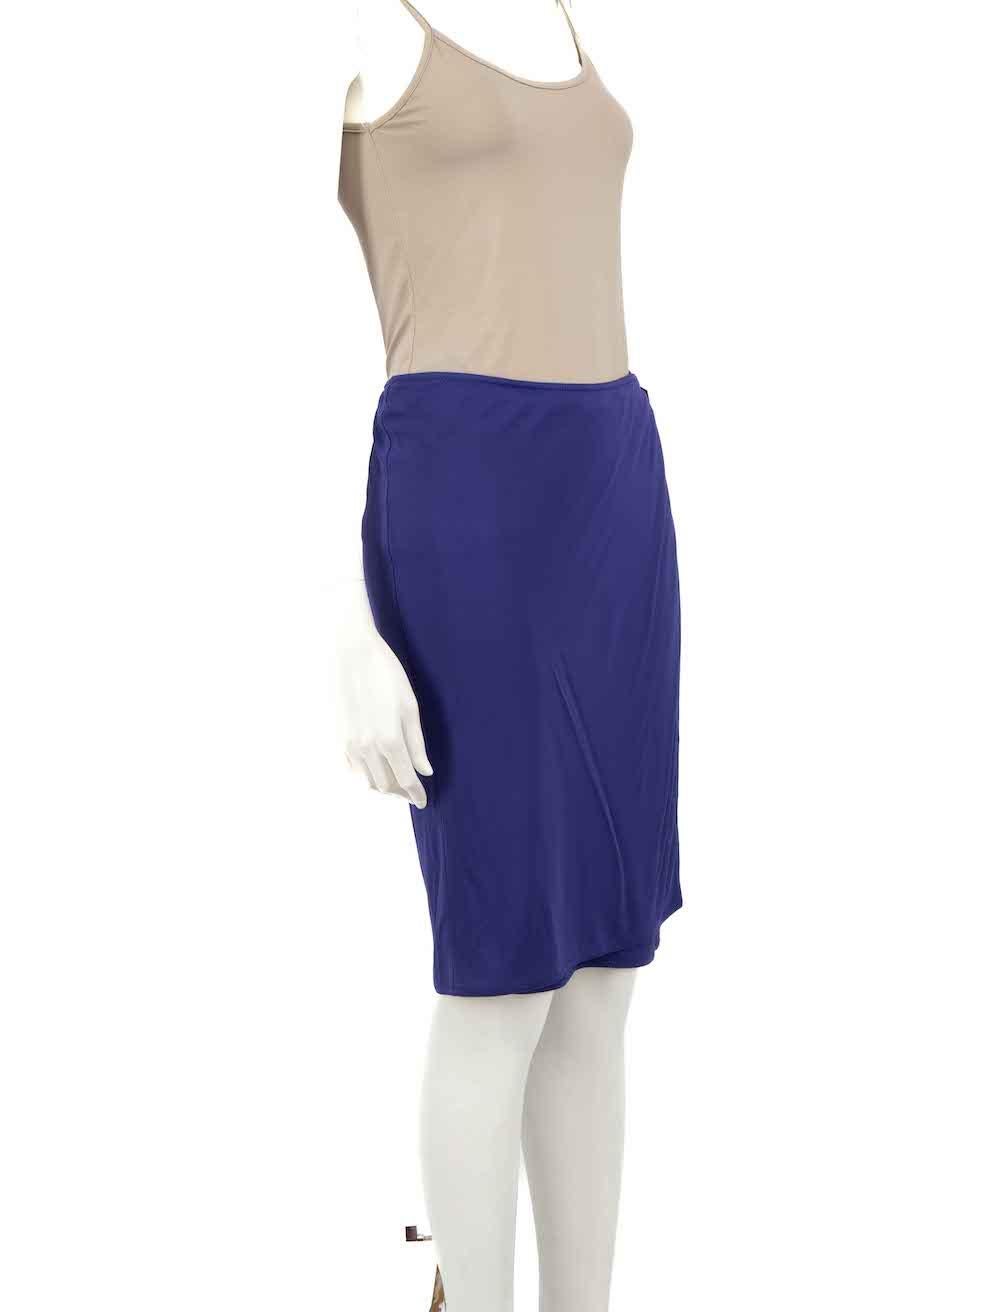 CONDITION is Good. Minor wear to skirt is evident. Light wear to fabric surface with a patch of discoloured marks found at the back left side on the hem of this used Hermès designer resale item.
 
 
 
 Details
 
 
 Purple
 
 Viscose
 
 Wrap skirt
 
